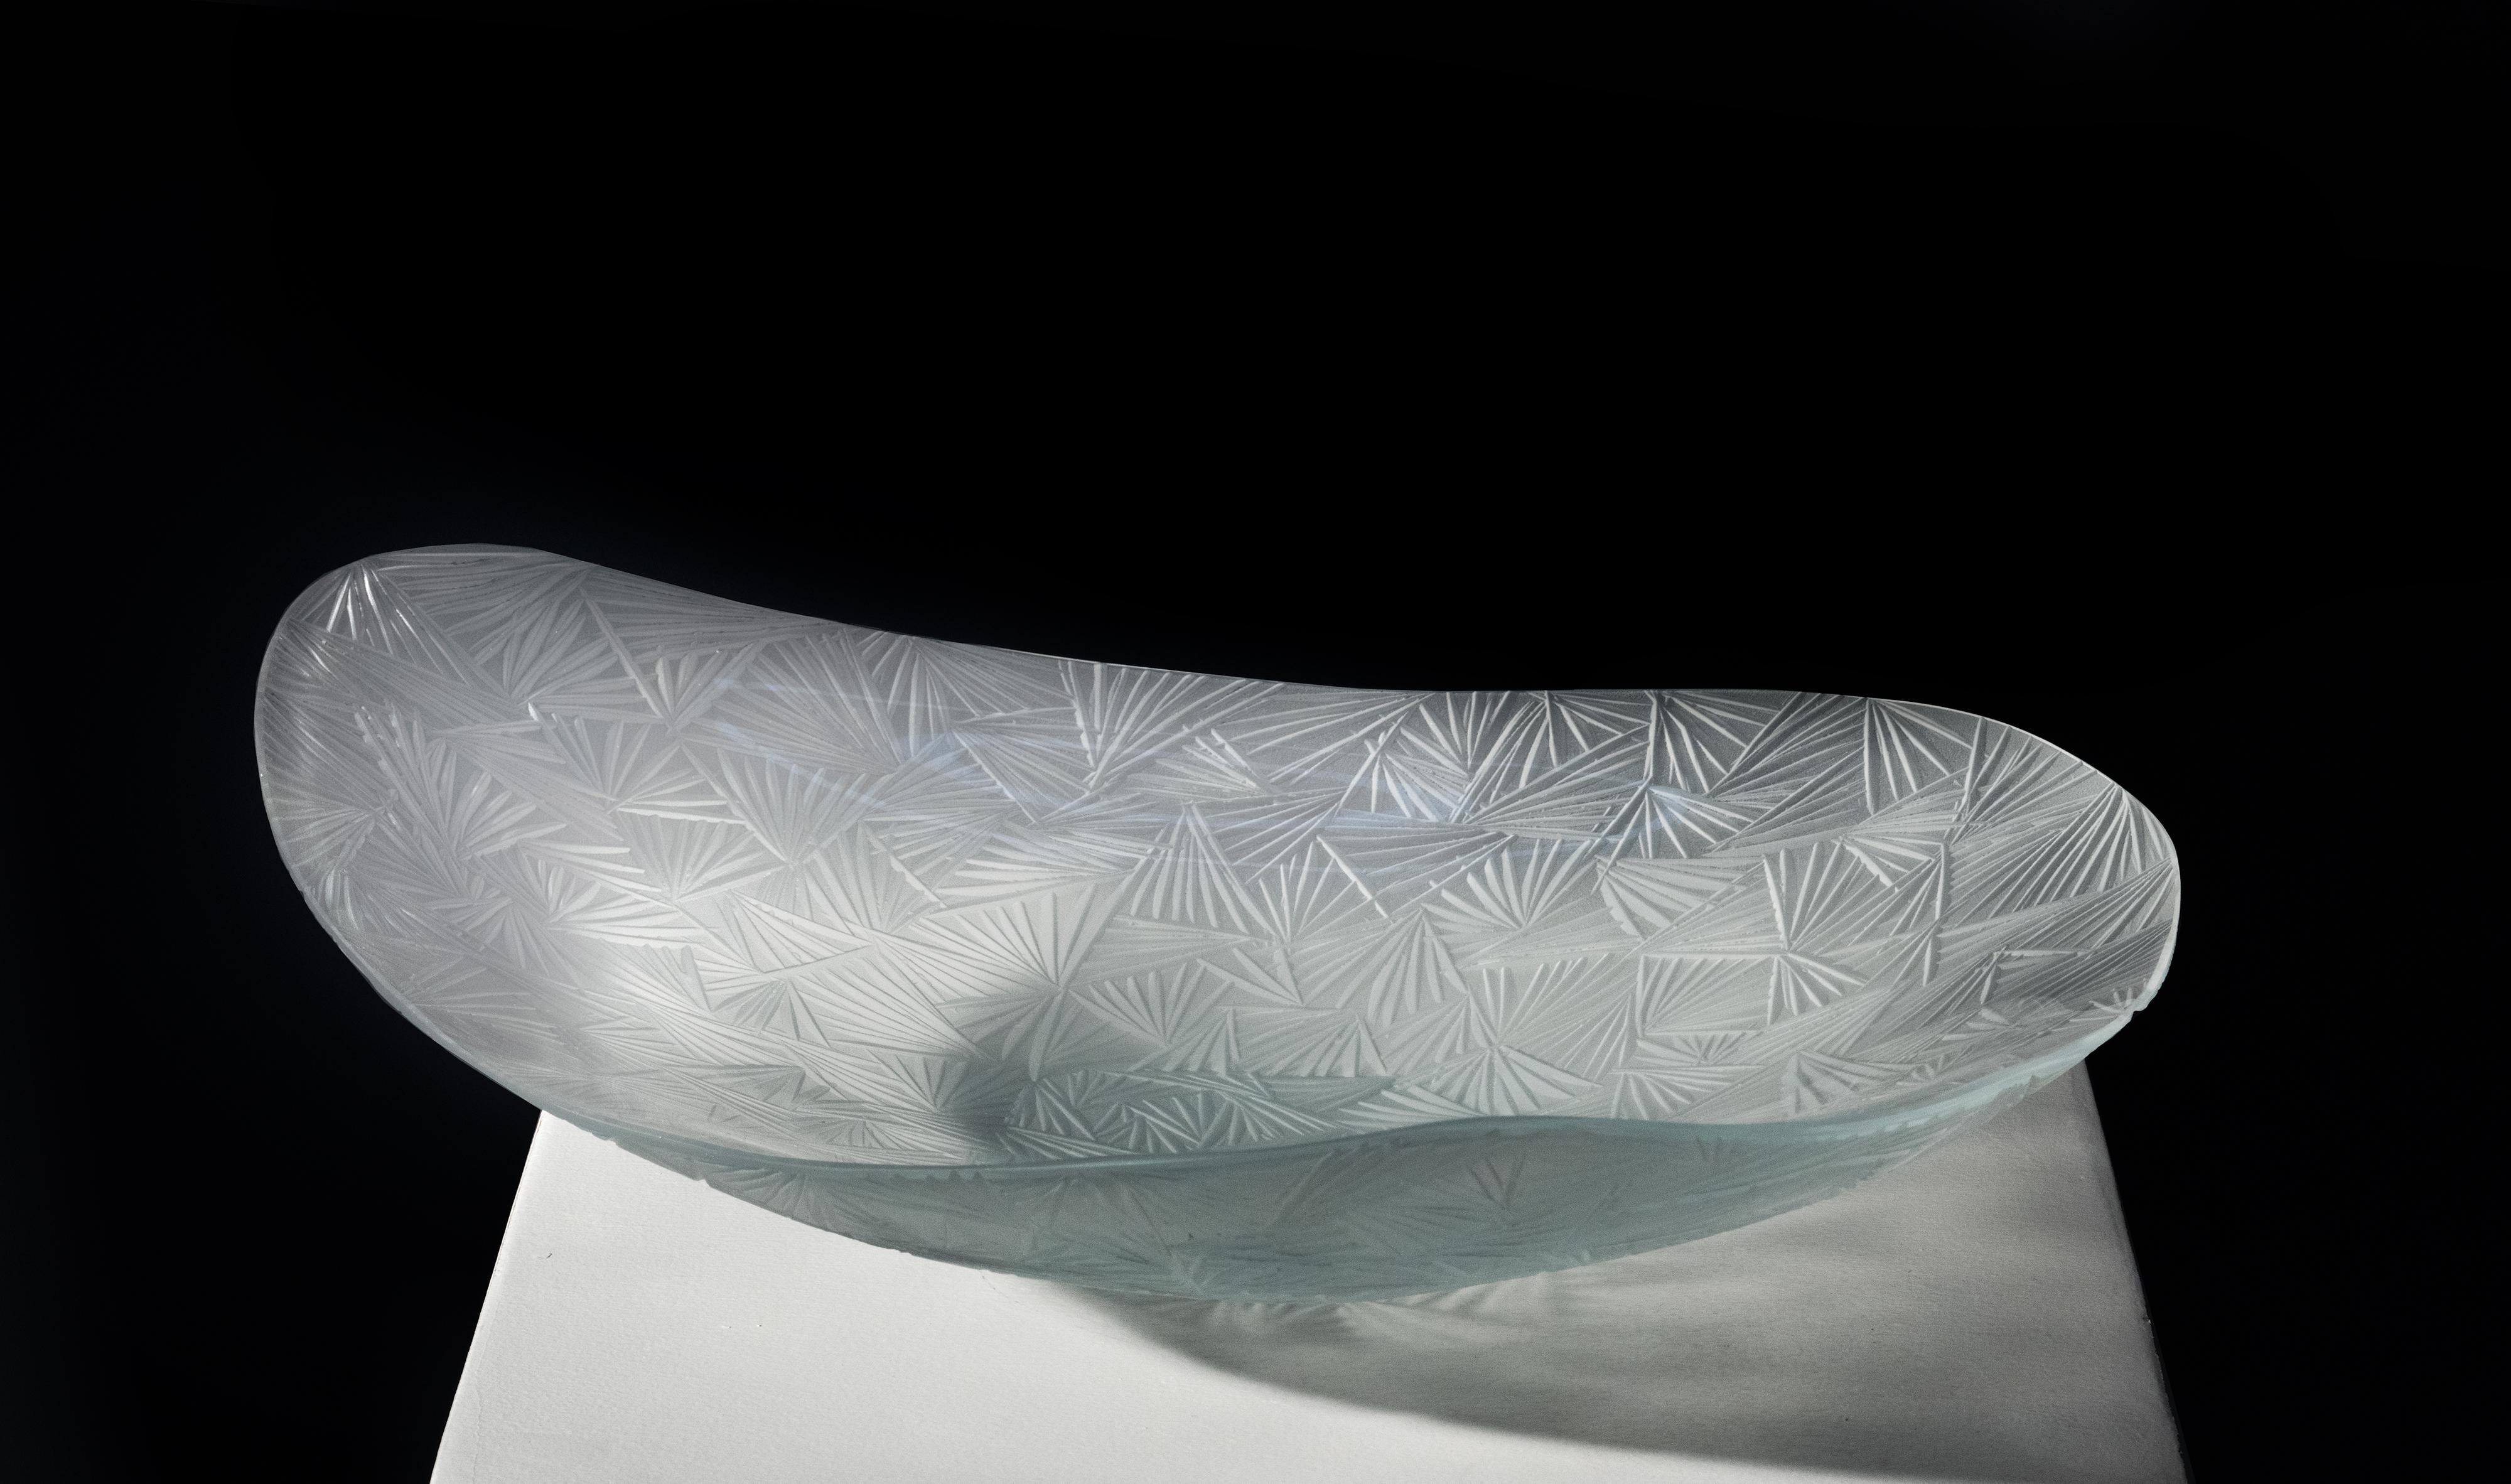 Collection 2021 of artistic bowls by Ghirò Studio (Milan).
Innovative design, fine craftsmanship and a strong artistic sense make this creation not only a bowl but a real artistic sculpture. The crystal has been curved and hand-engraved at the